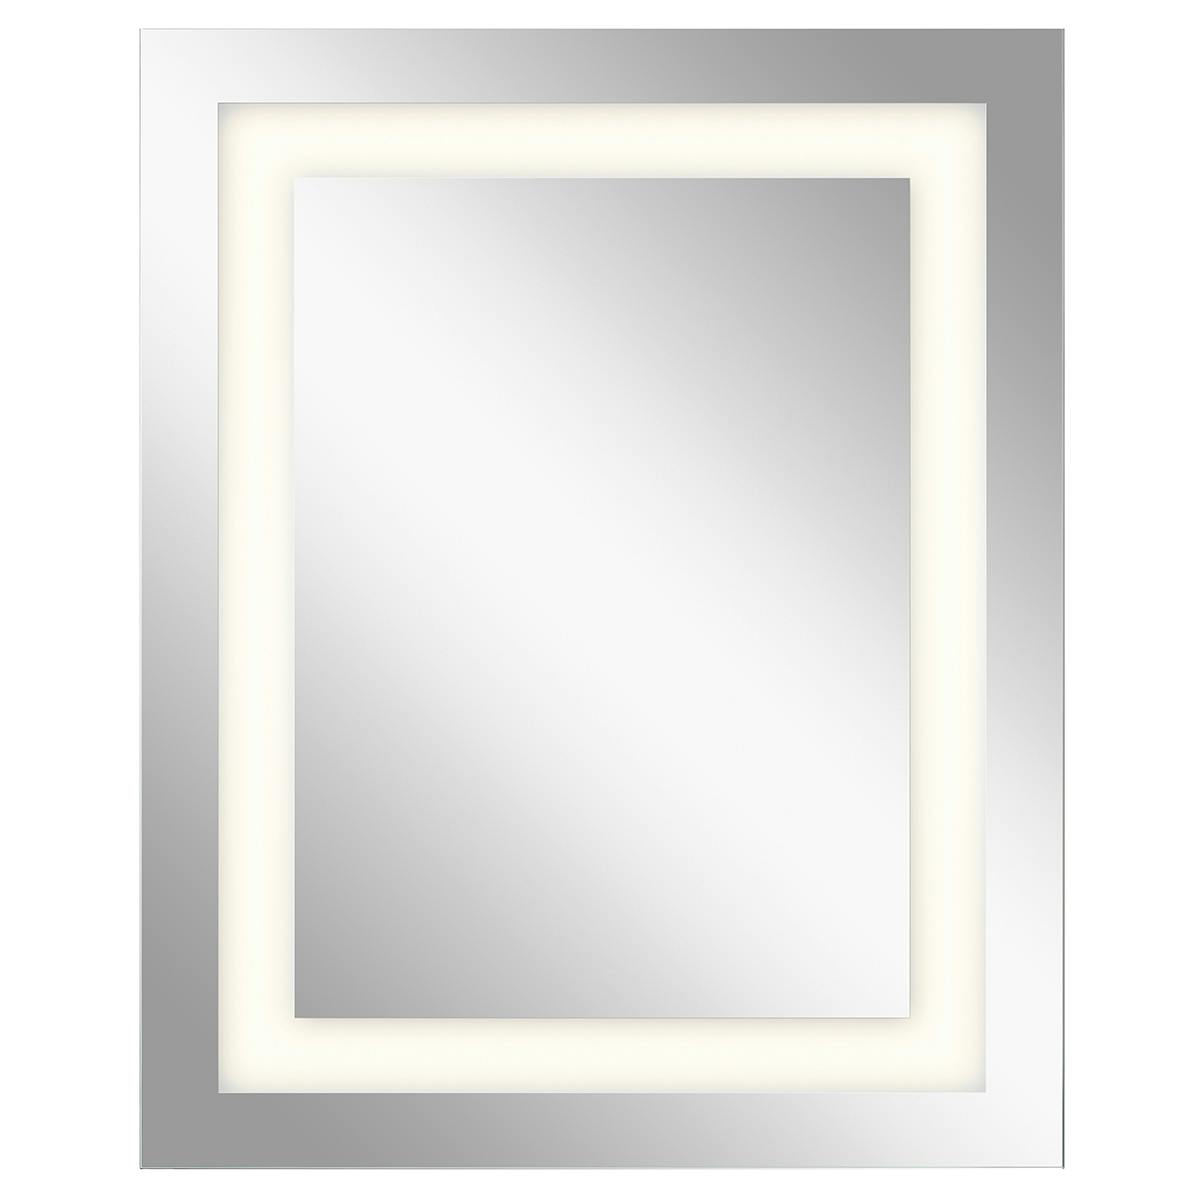 40" x 32" Rectangular LED Backlit Mirror hung vertically on a white background